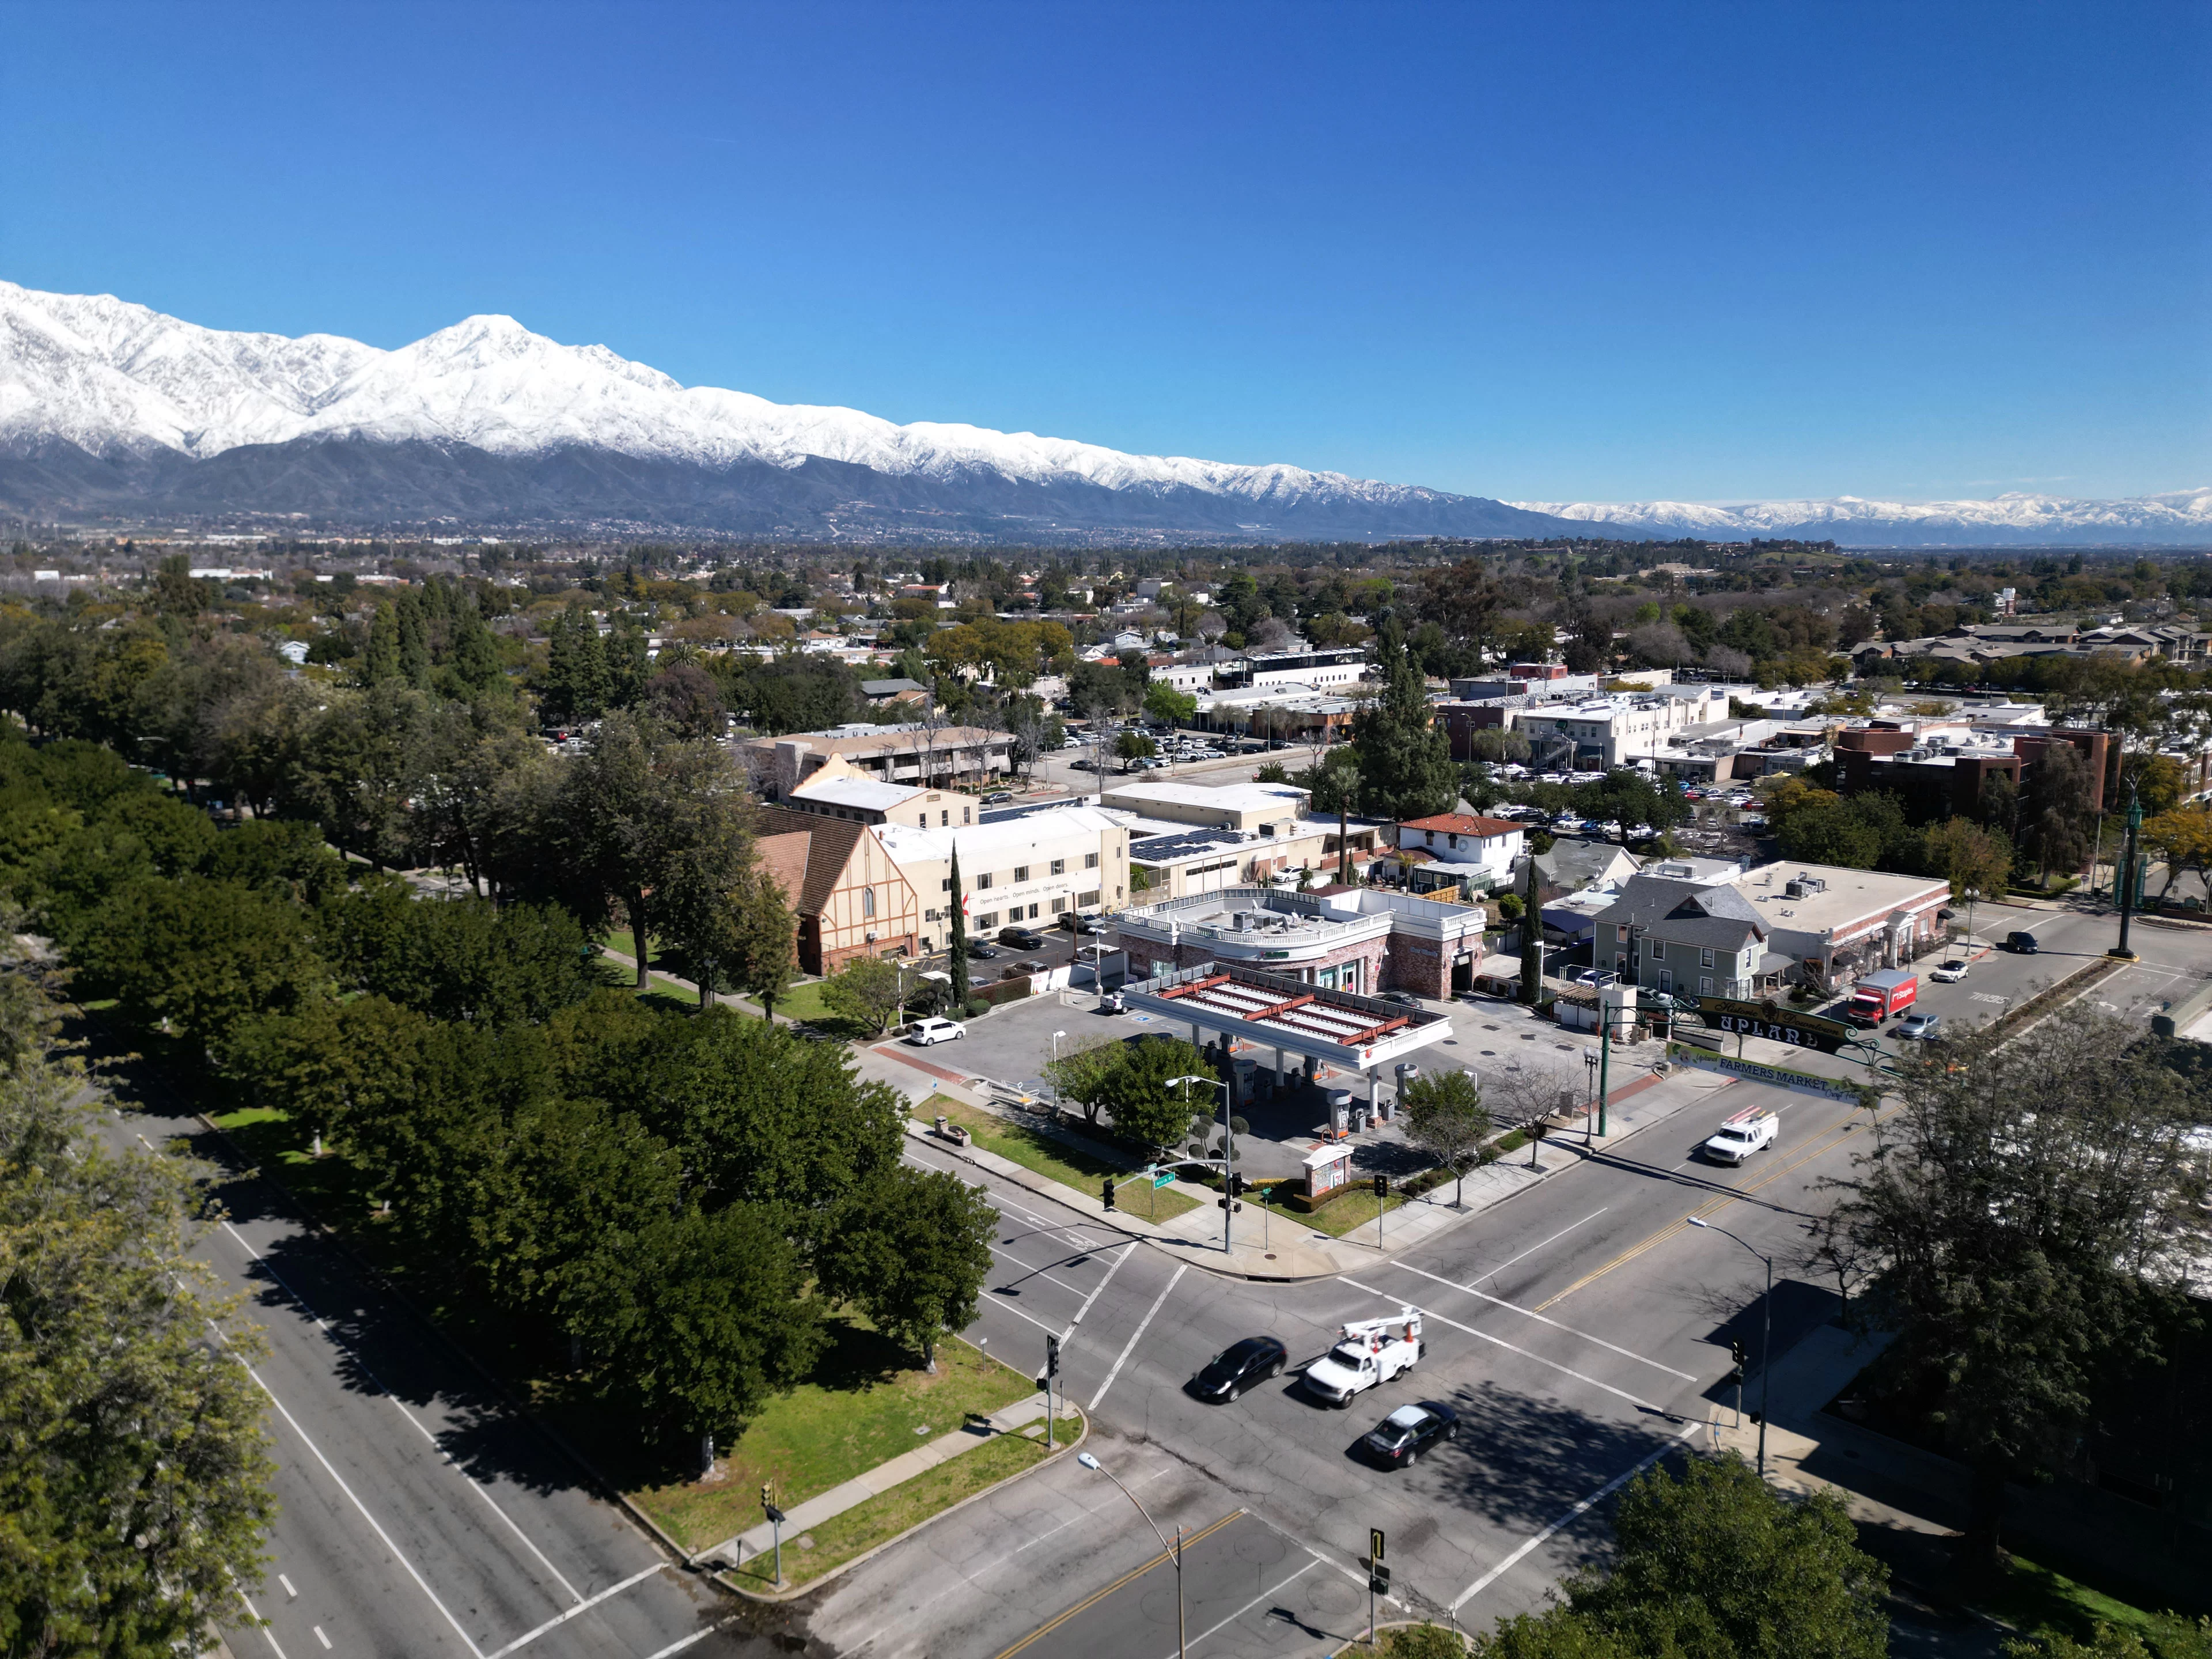 Aerial view of Historic downtown Upland with blue sky and snow-capped mountains